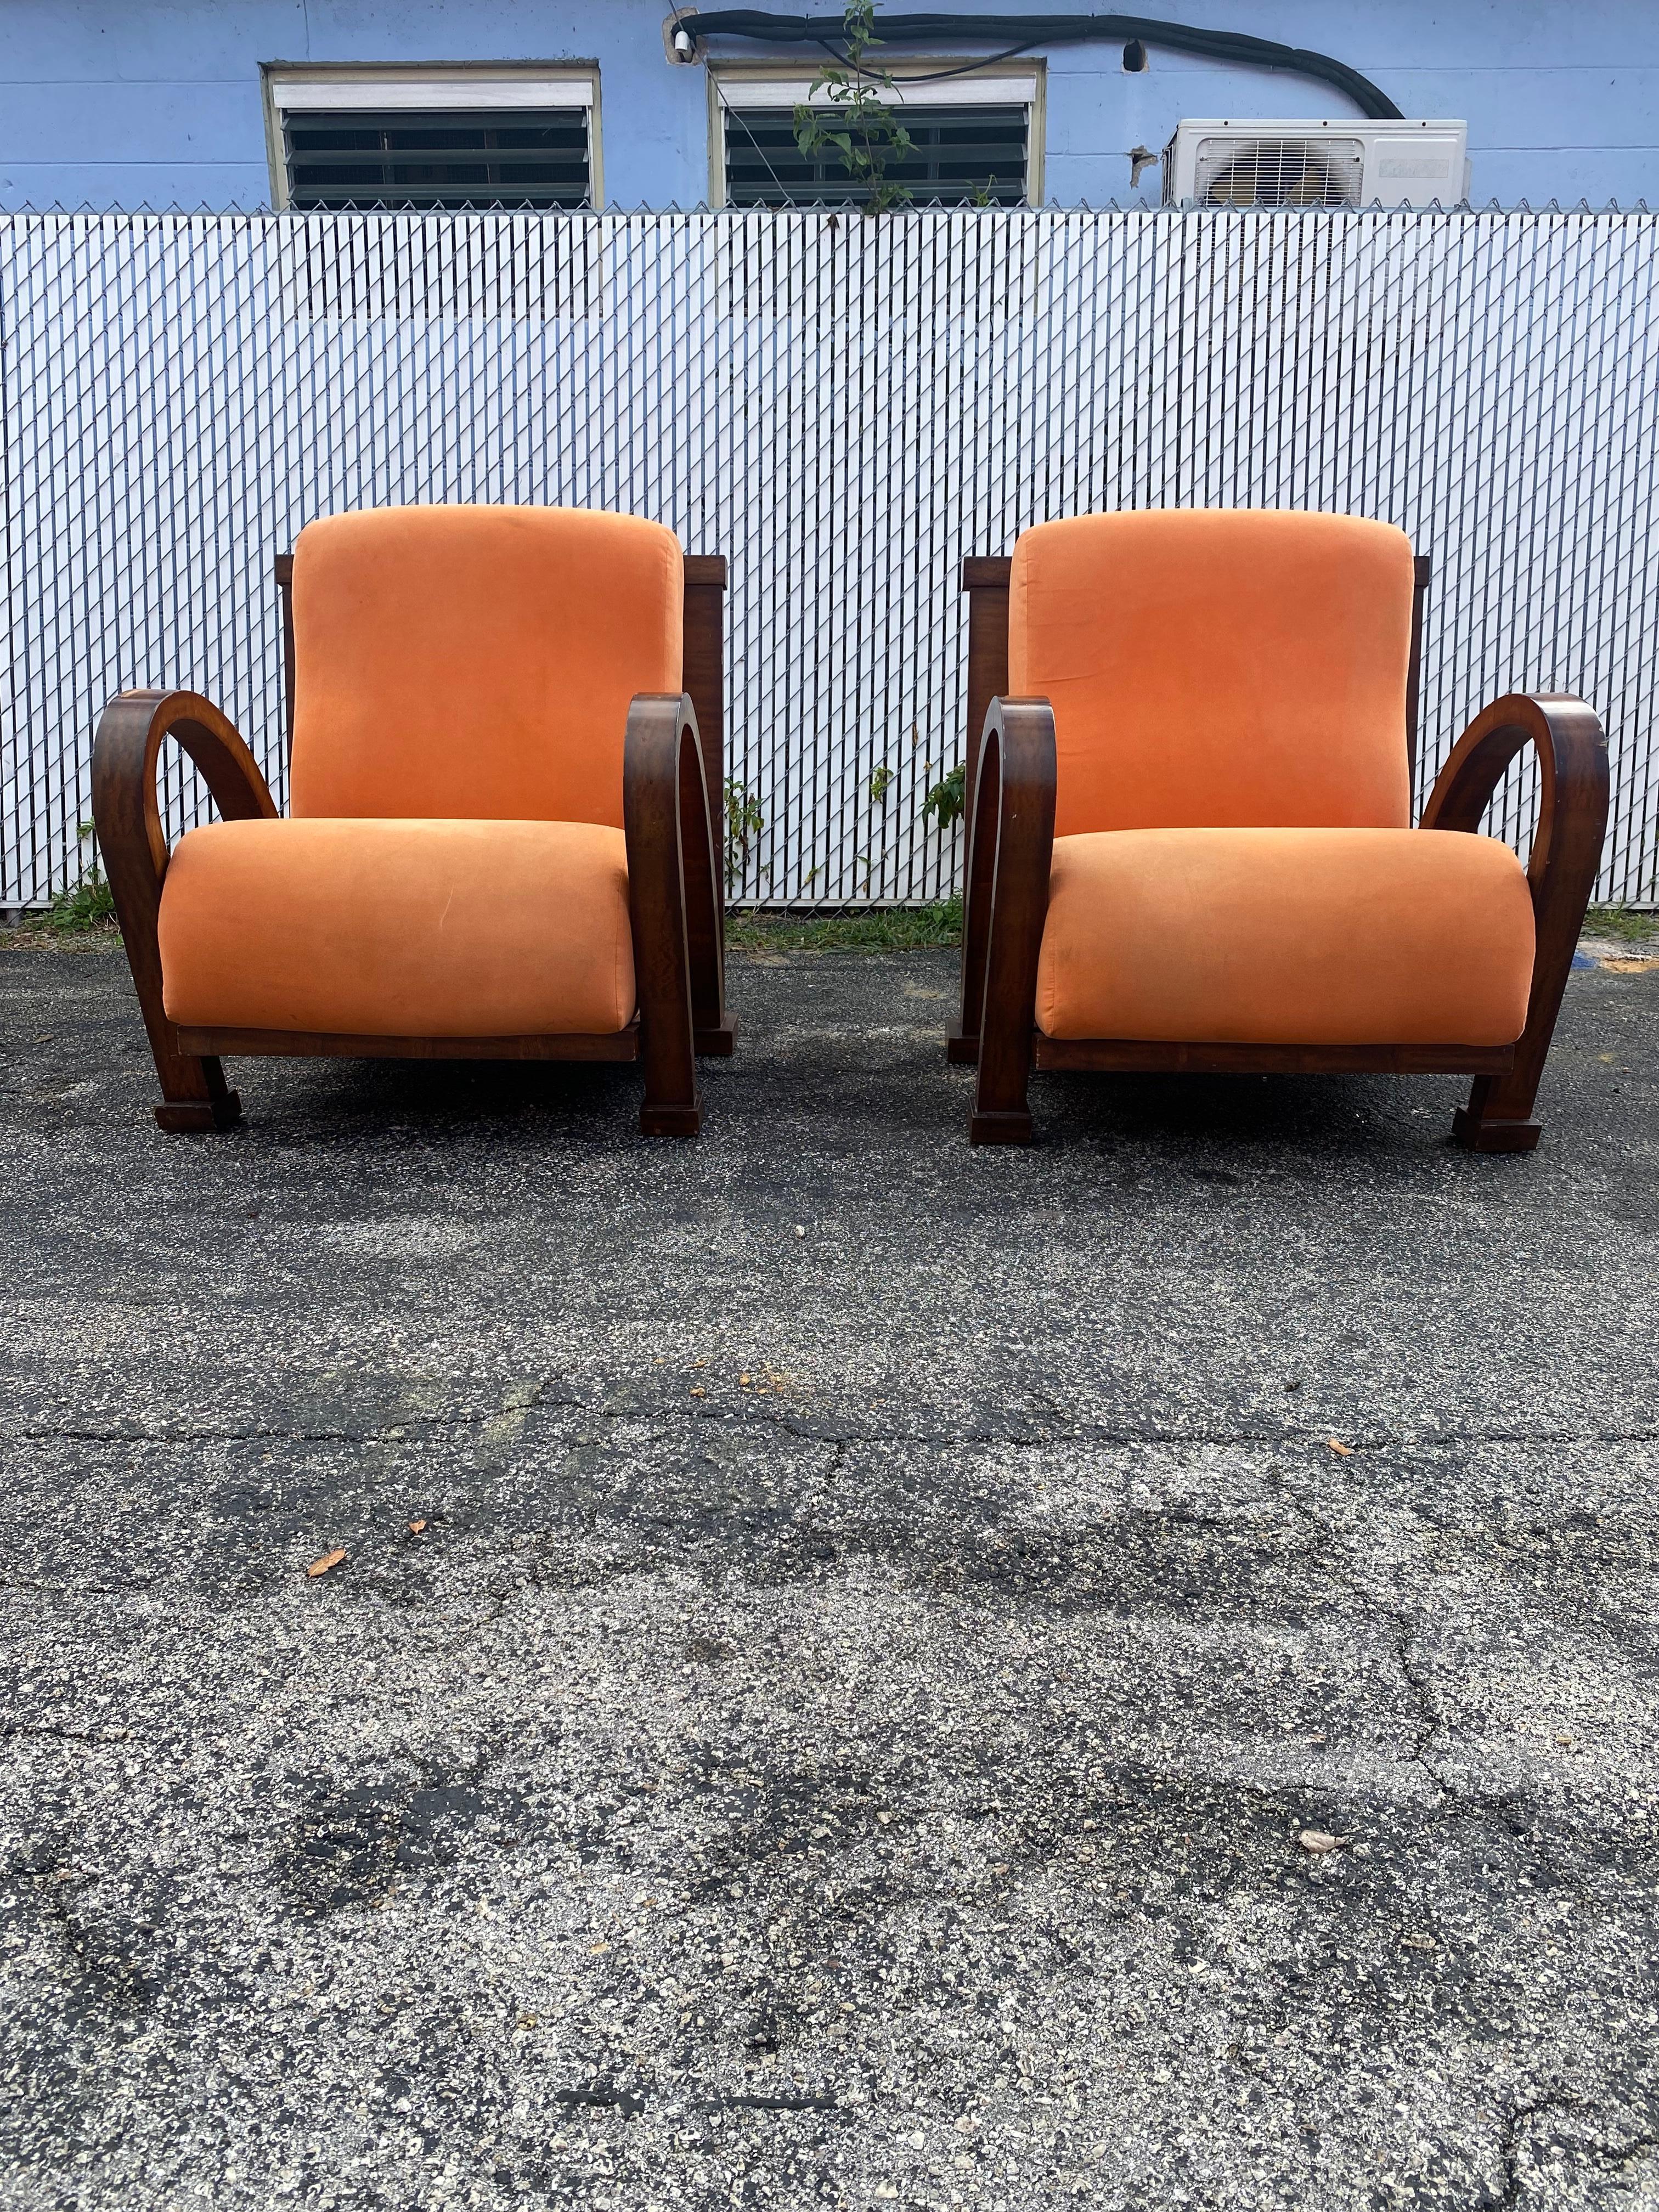 French 1930s Walnut Orange Art Deco Bentwood Chairs, Set of 2 For Sale